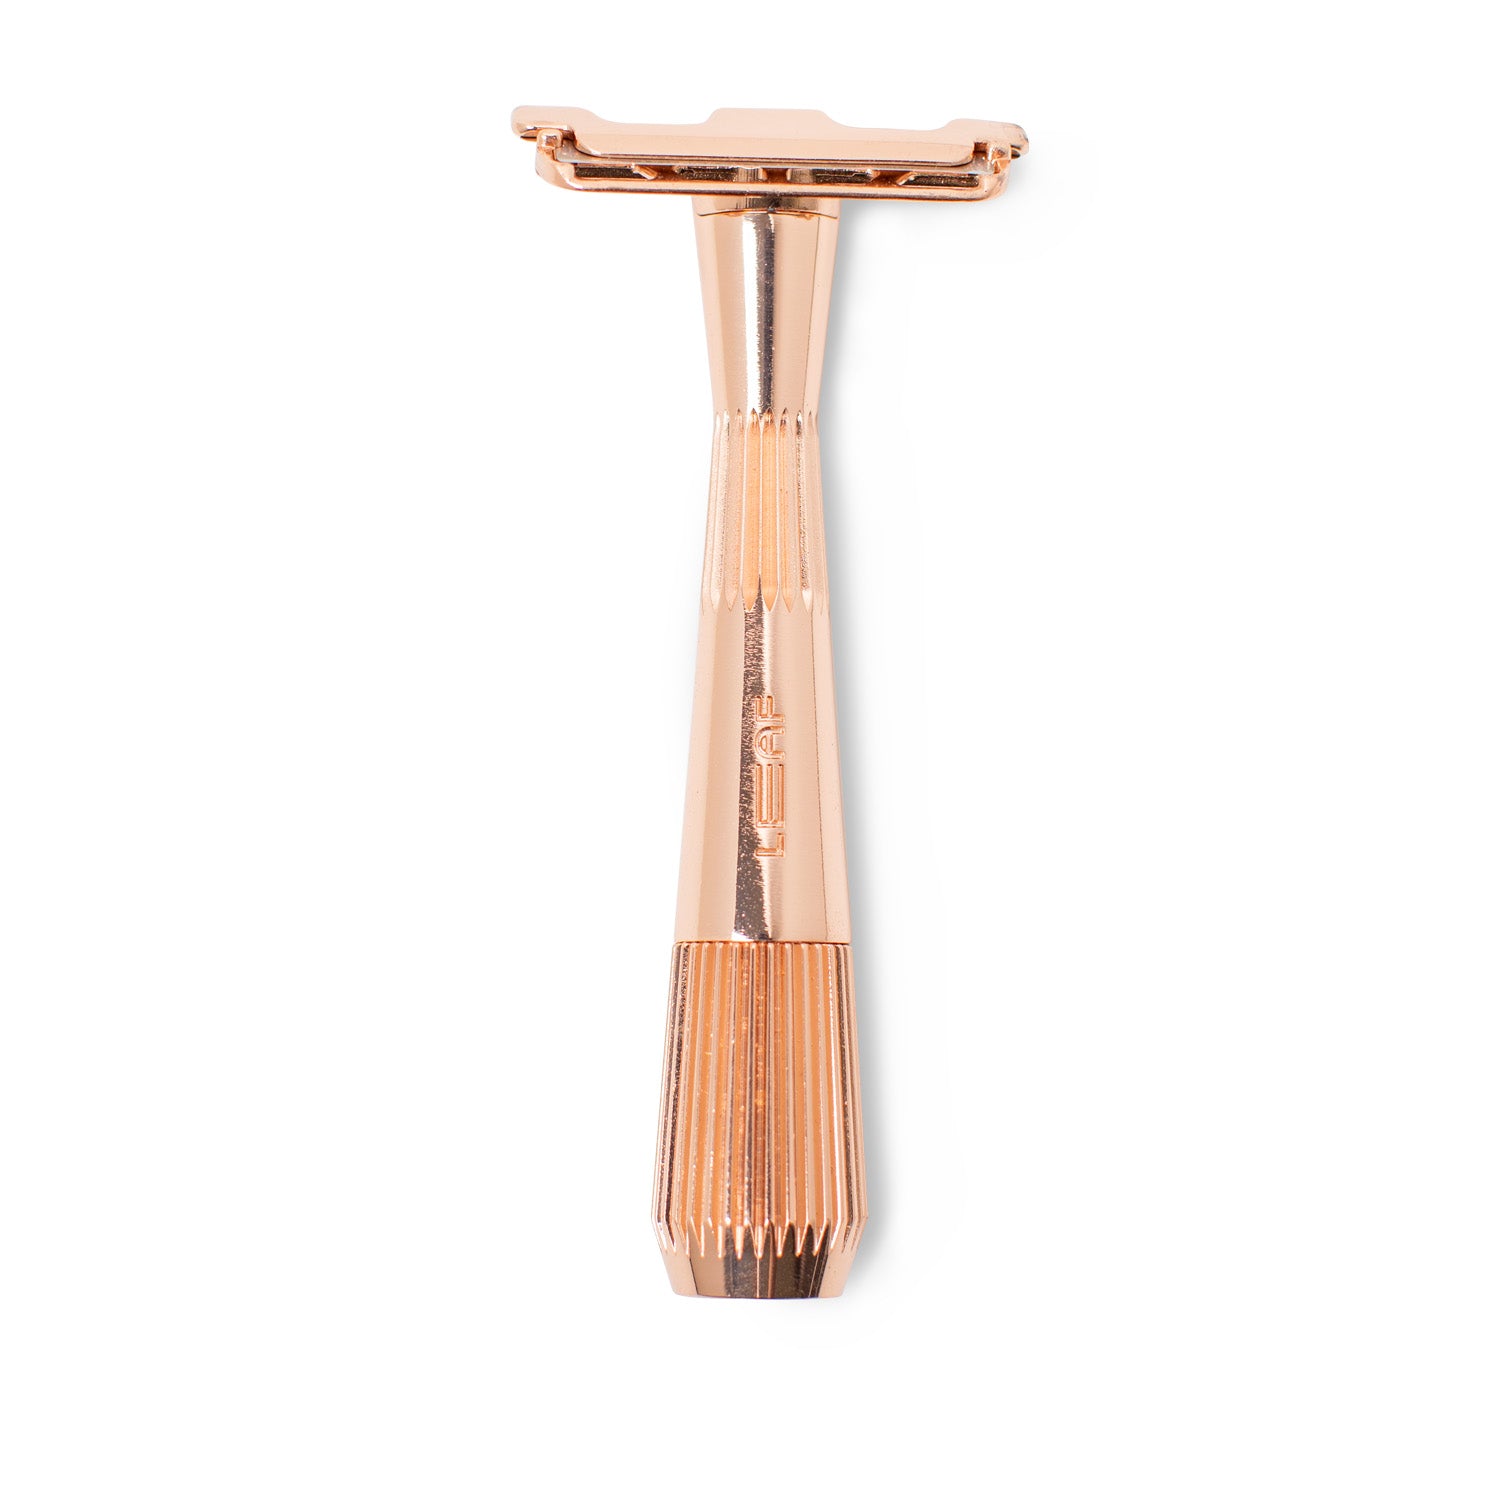 A Leaf Shave brand Single-Edge razor in the finish called Rose Gold